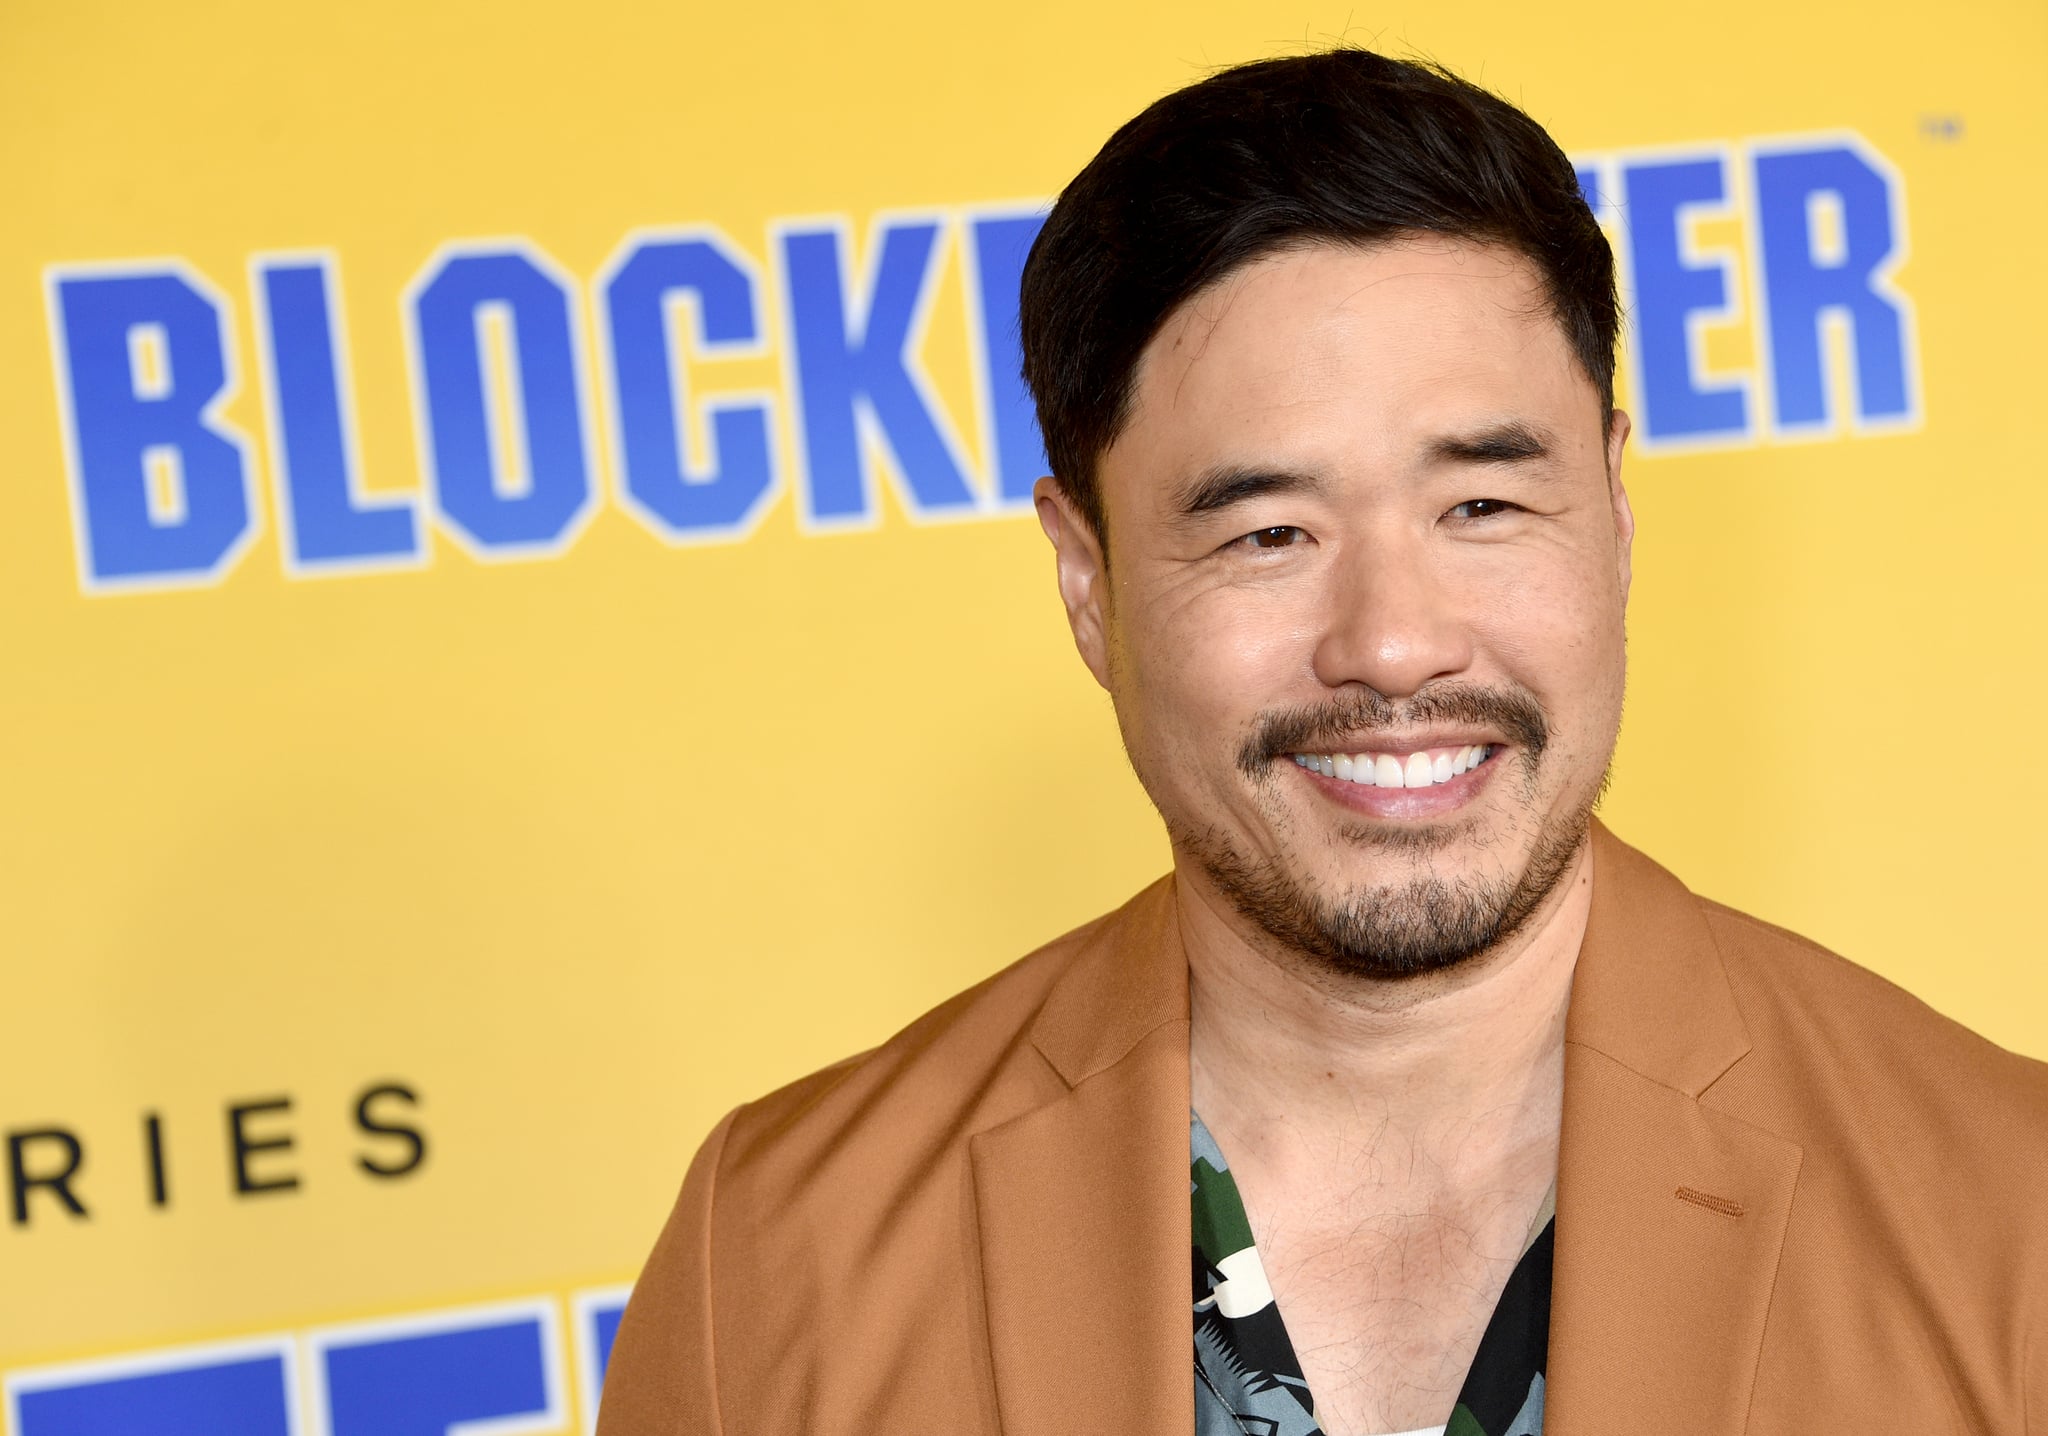 How Working at His Dad’s Photo Store Helped Randall Park Relate to His “Blockbuster” Character